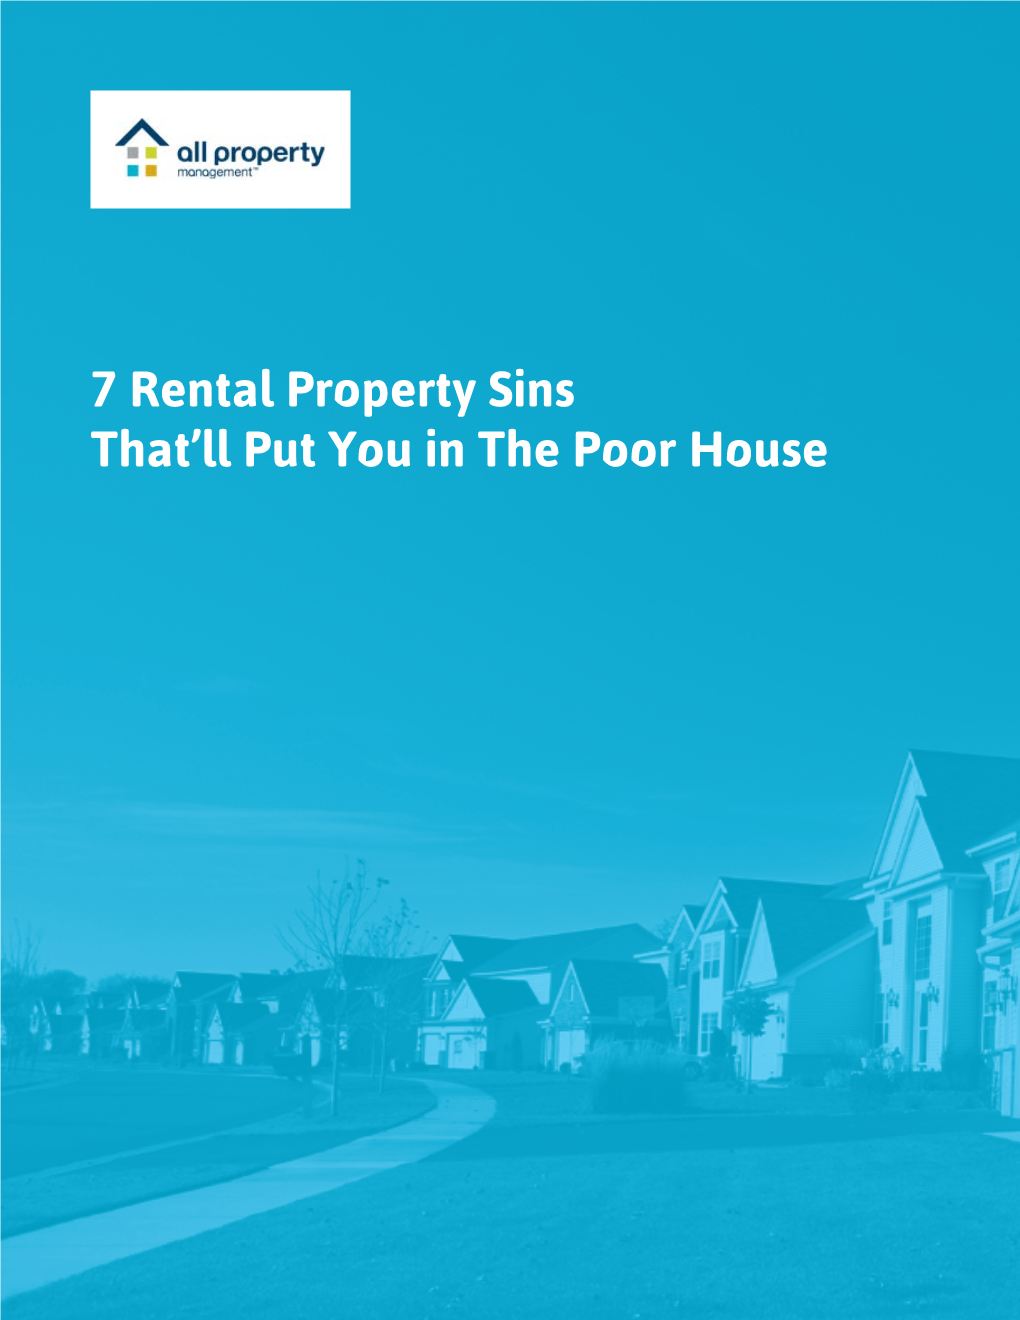 The 7 Deadly Sins of Rental Property Management